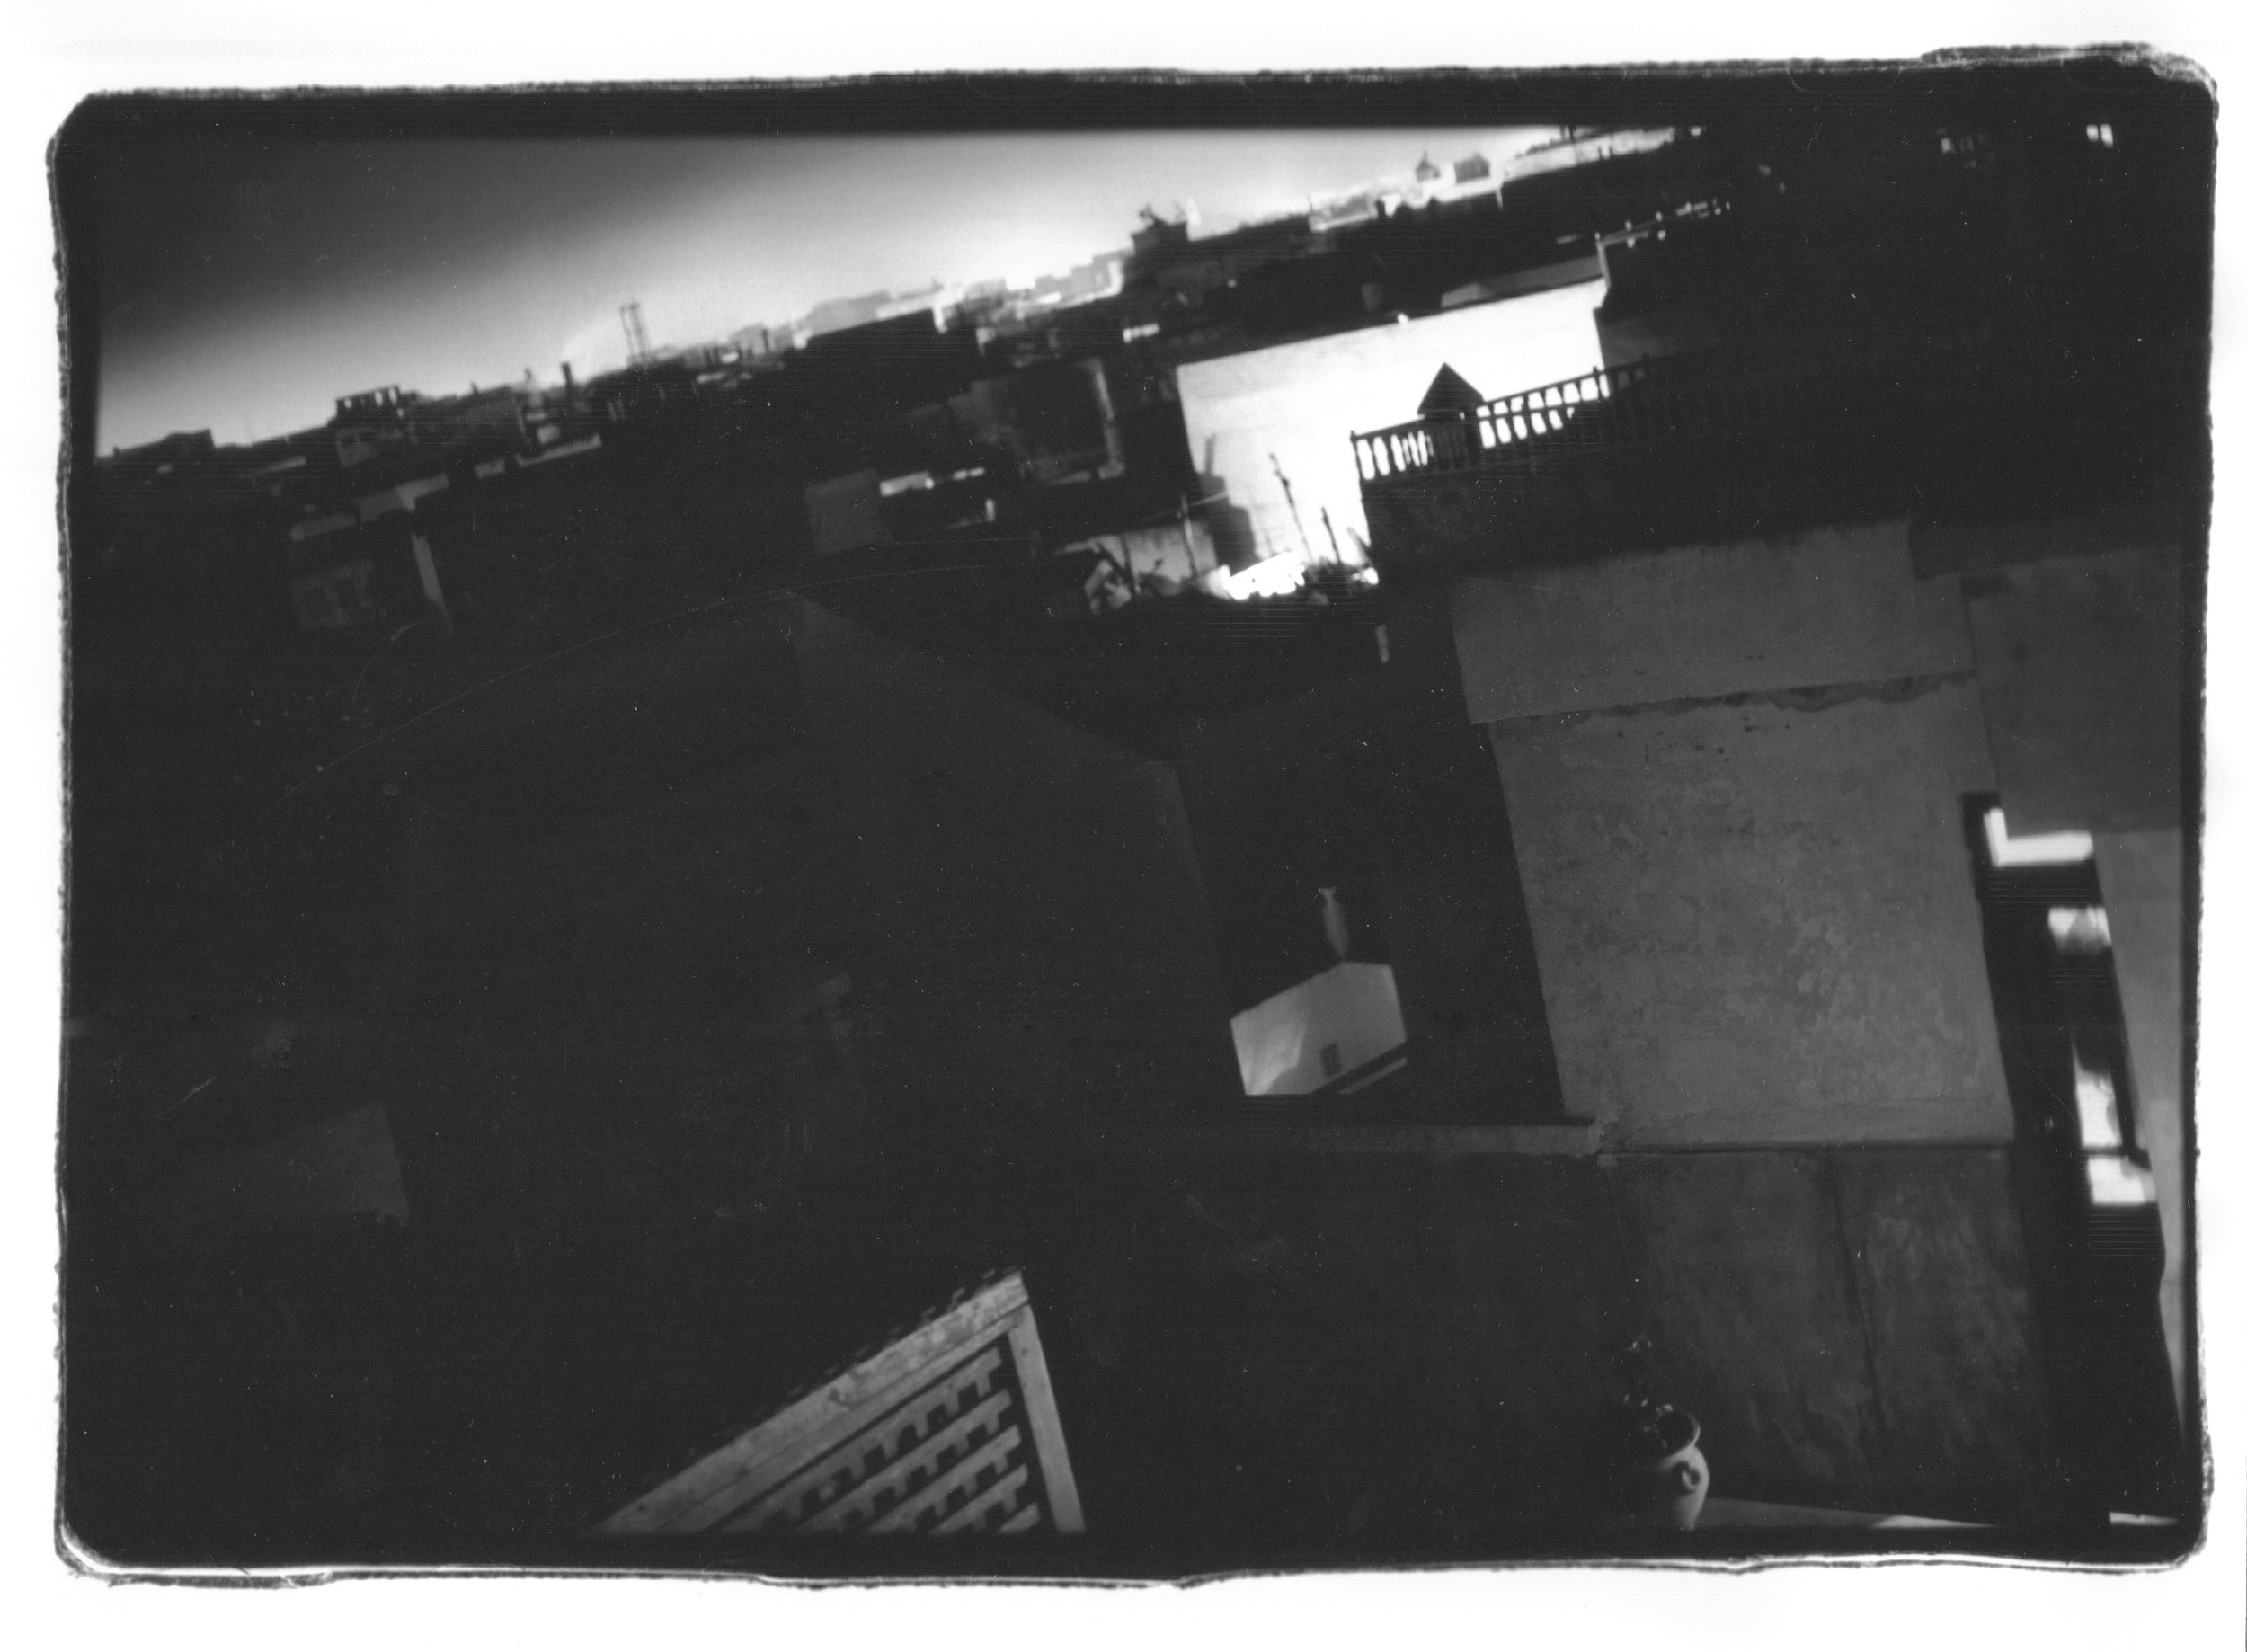 Rooftops at night, Morocco, 2012